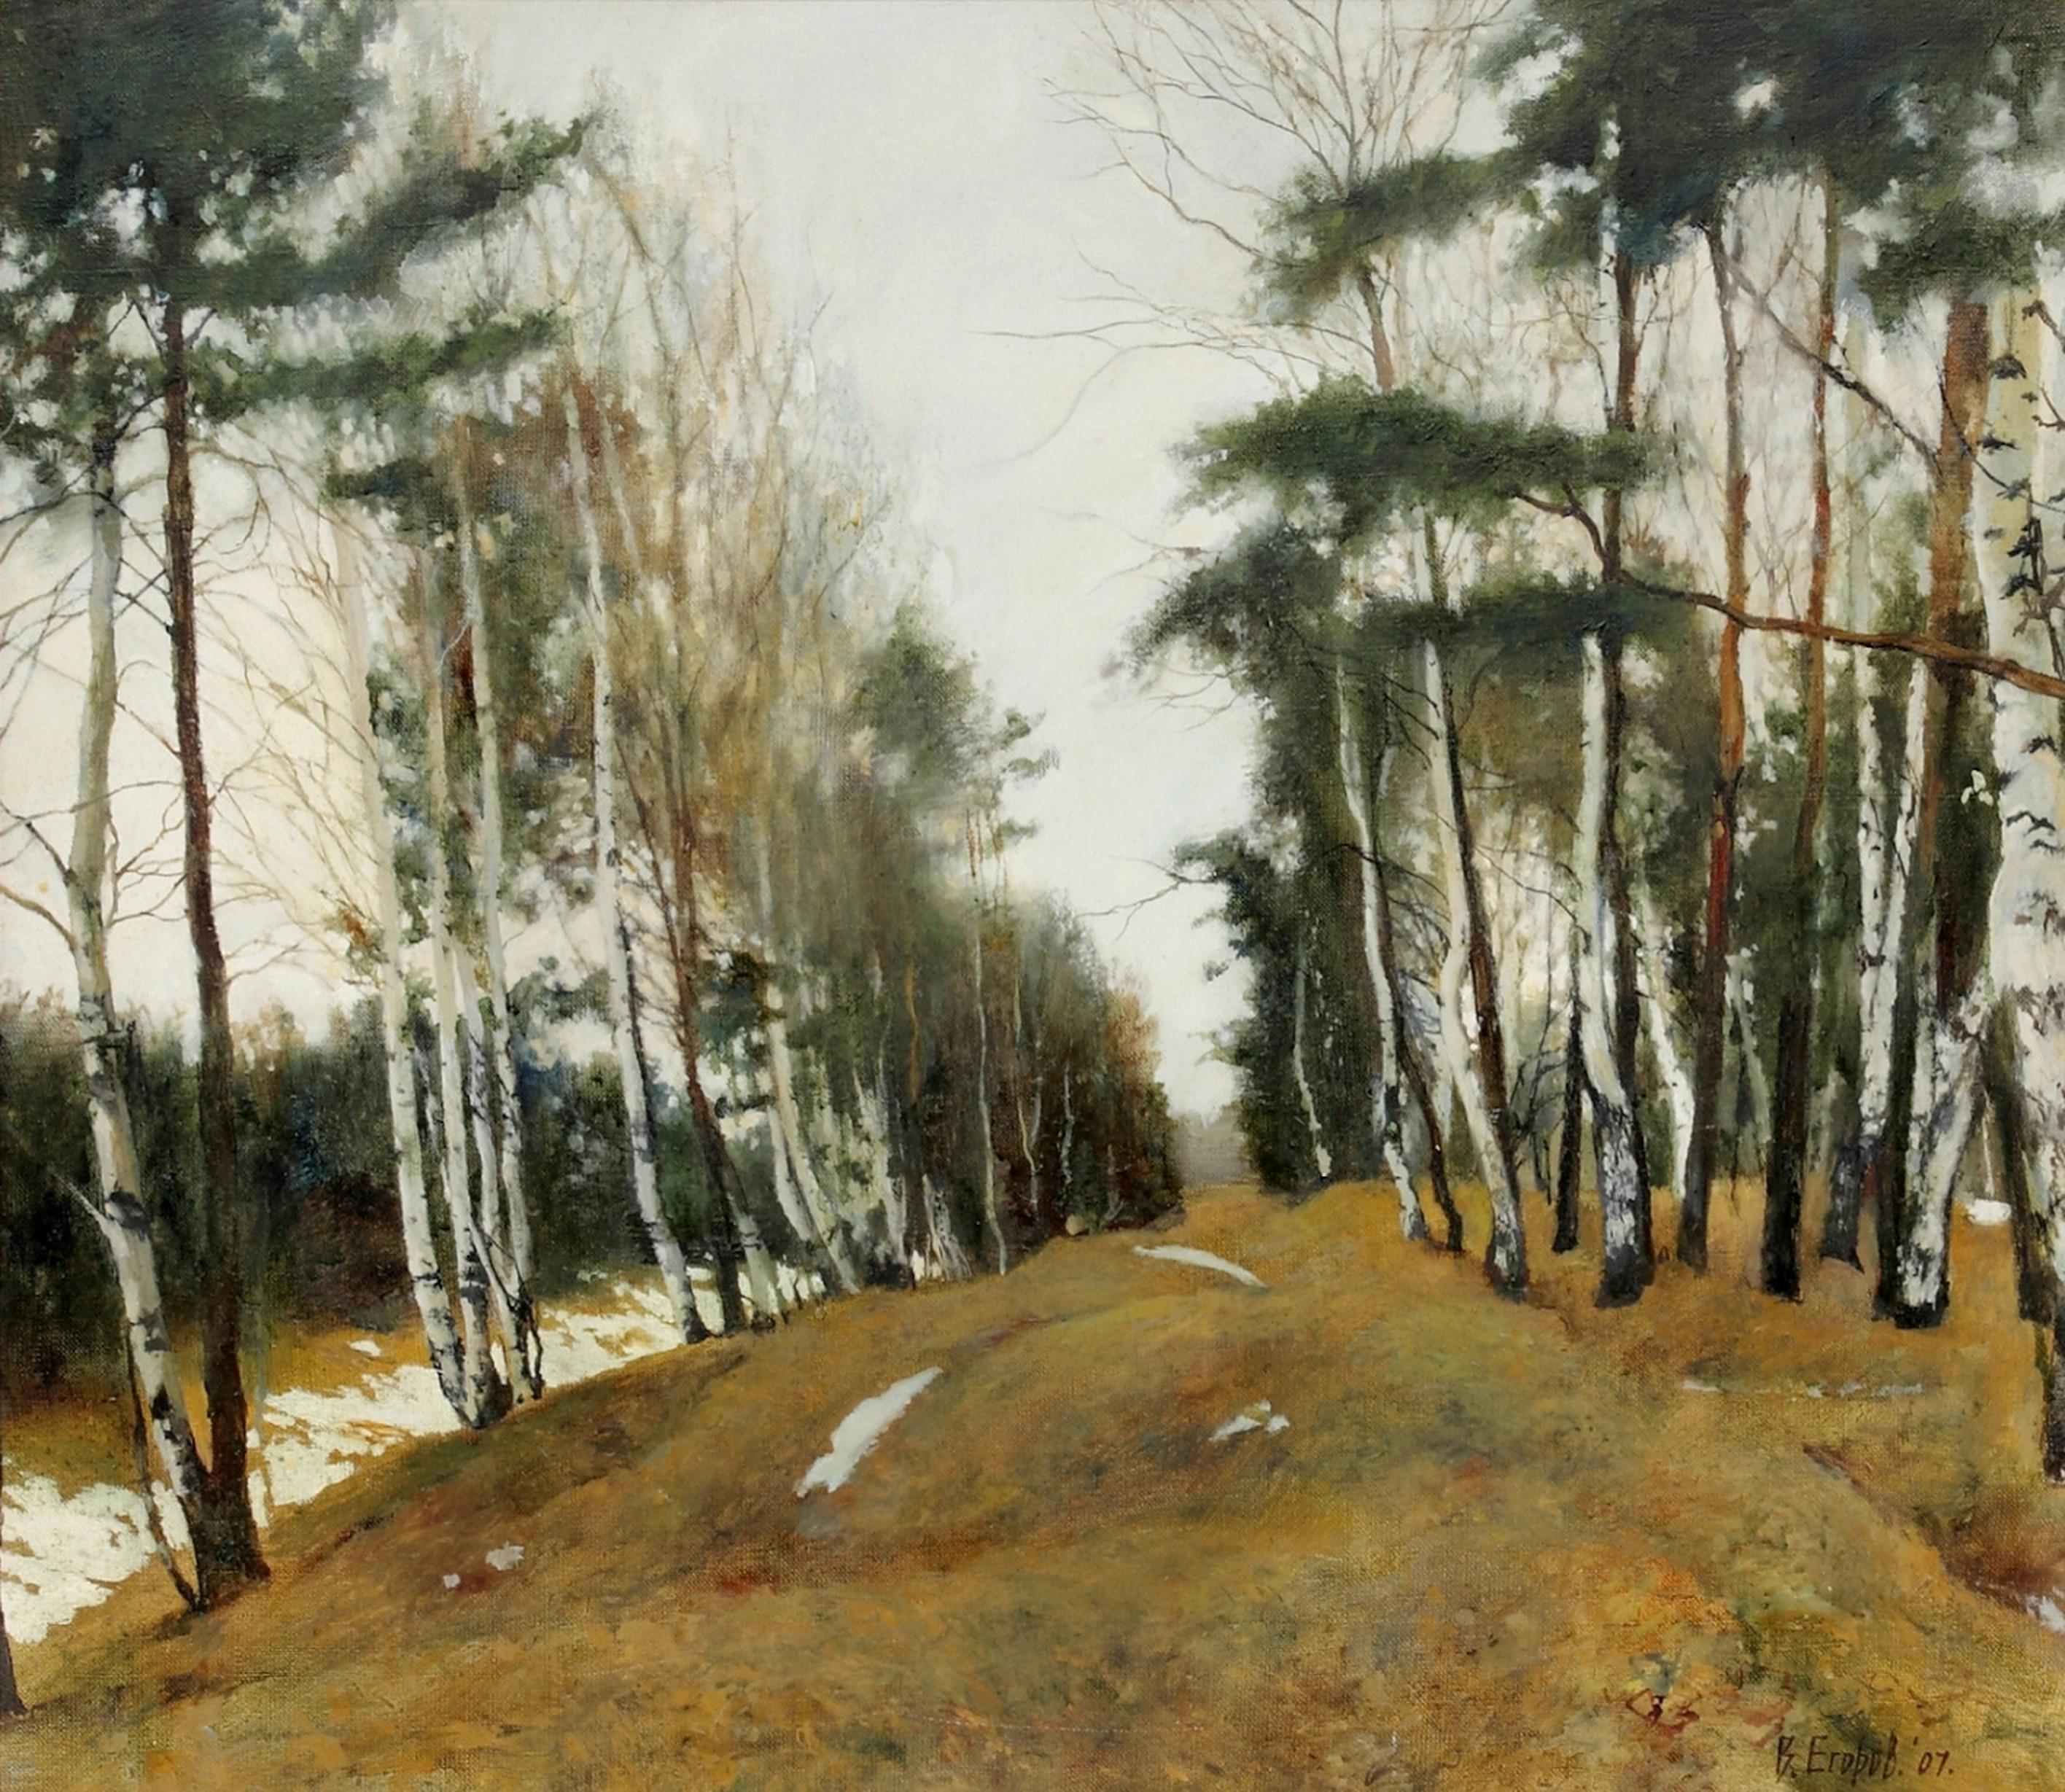 Receding Snow is an original oil onto canvas by Russian painter Victor Egorov. It depicts the turning of seasons as Egorov details the receding snow from the clearings within the woodland.  Egorov's realist style remains influenced by the